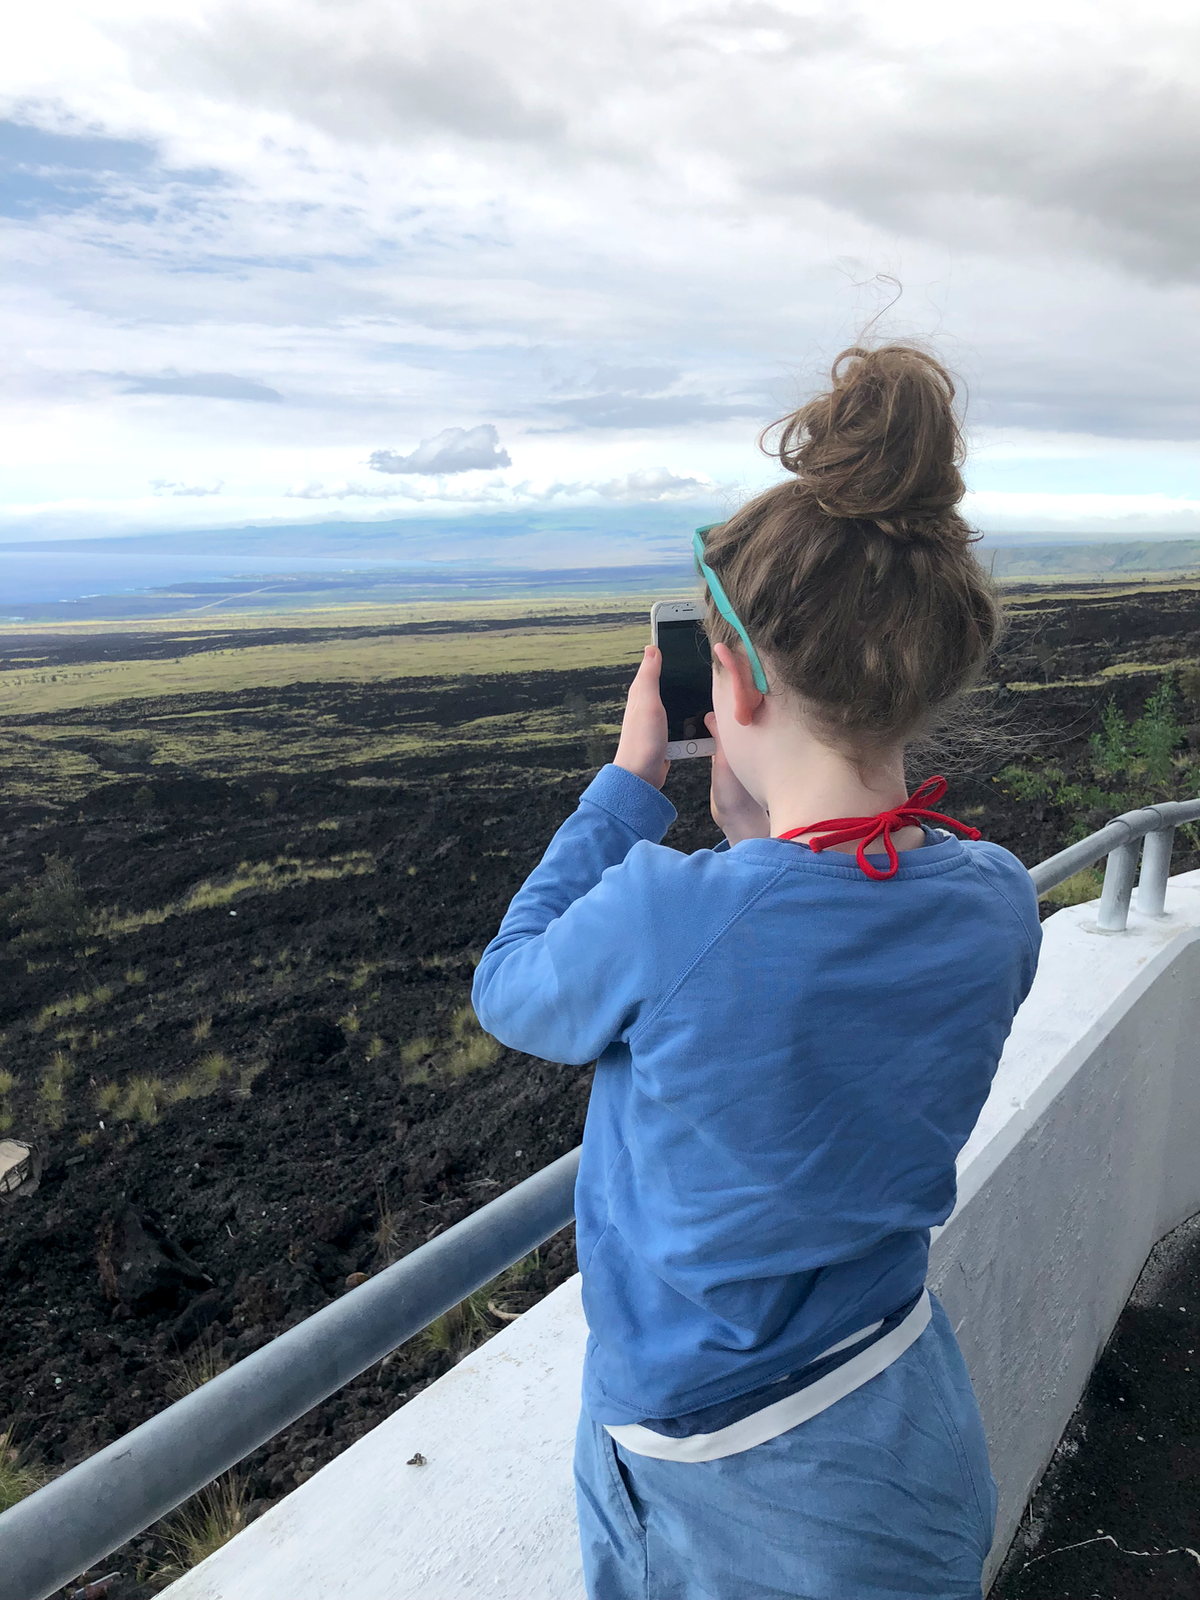 Mom and Daughter Trip to The Big Island of Hawaii featured by popular lifestyle blogger, Design Mom